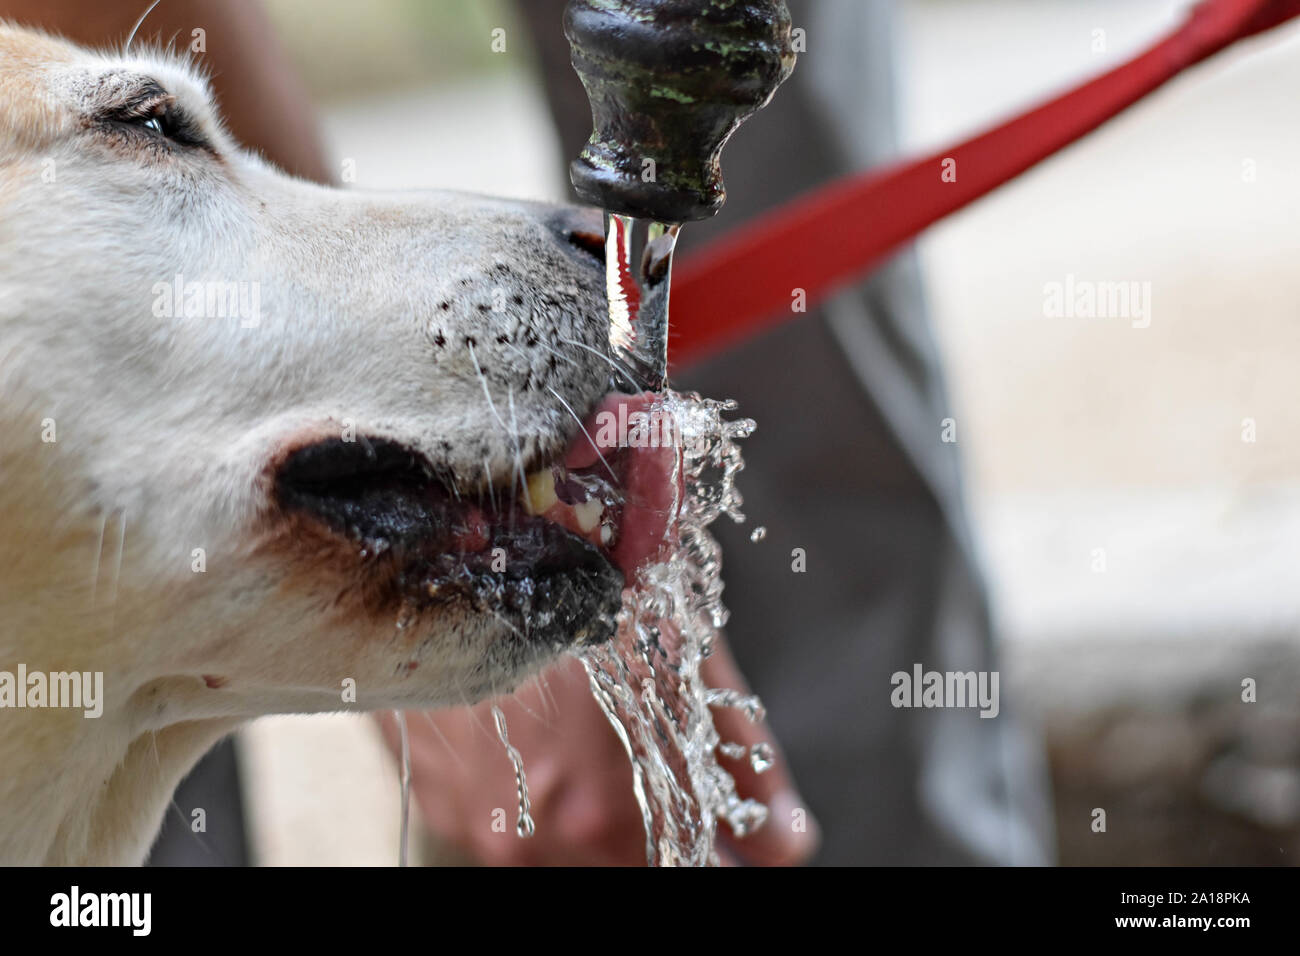 Cute Labrador retriever dog drinking clean cold water from water faucet - Image Stock Photo